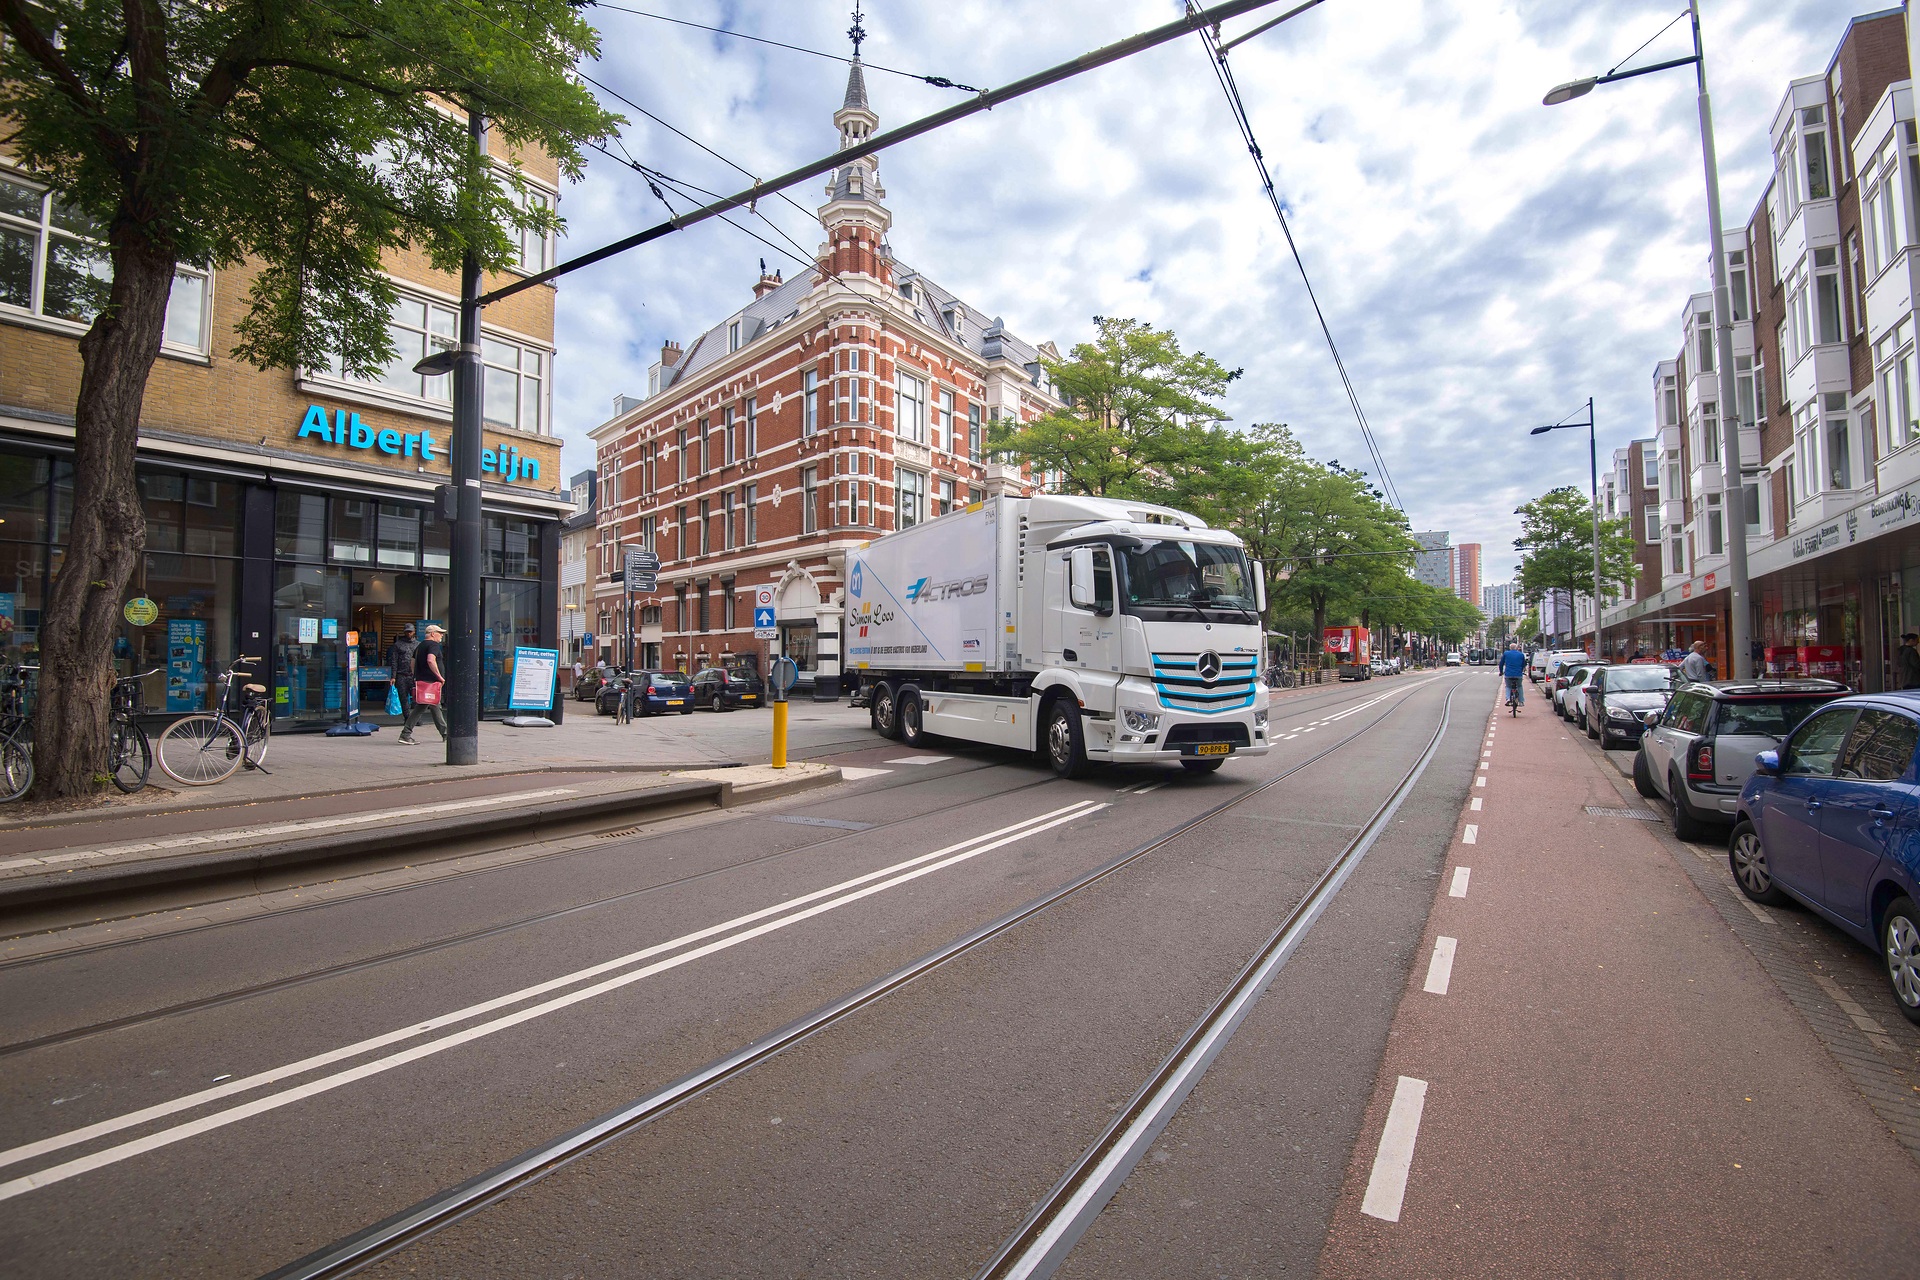 Starting signal for second test phase with further customers: Mercedes-Benz eActros electrifies Rotterdam and The Hague with logistics service provider Simon Loos